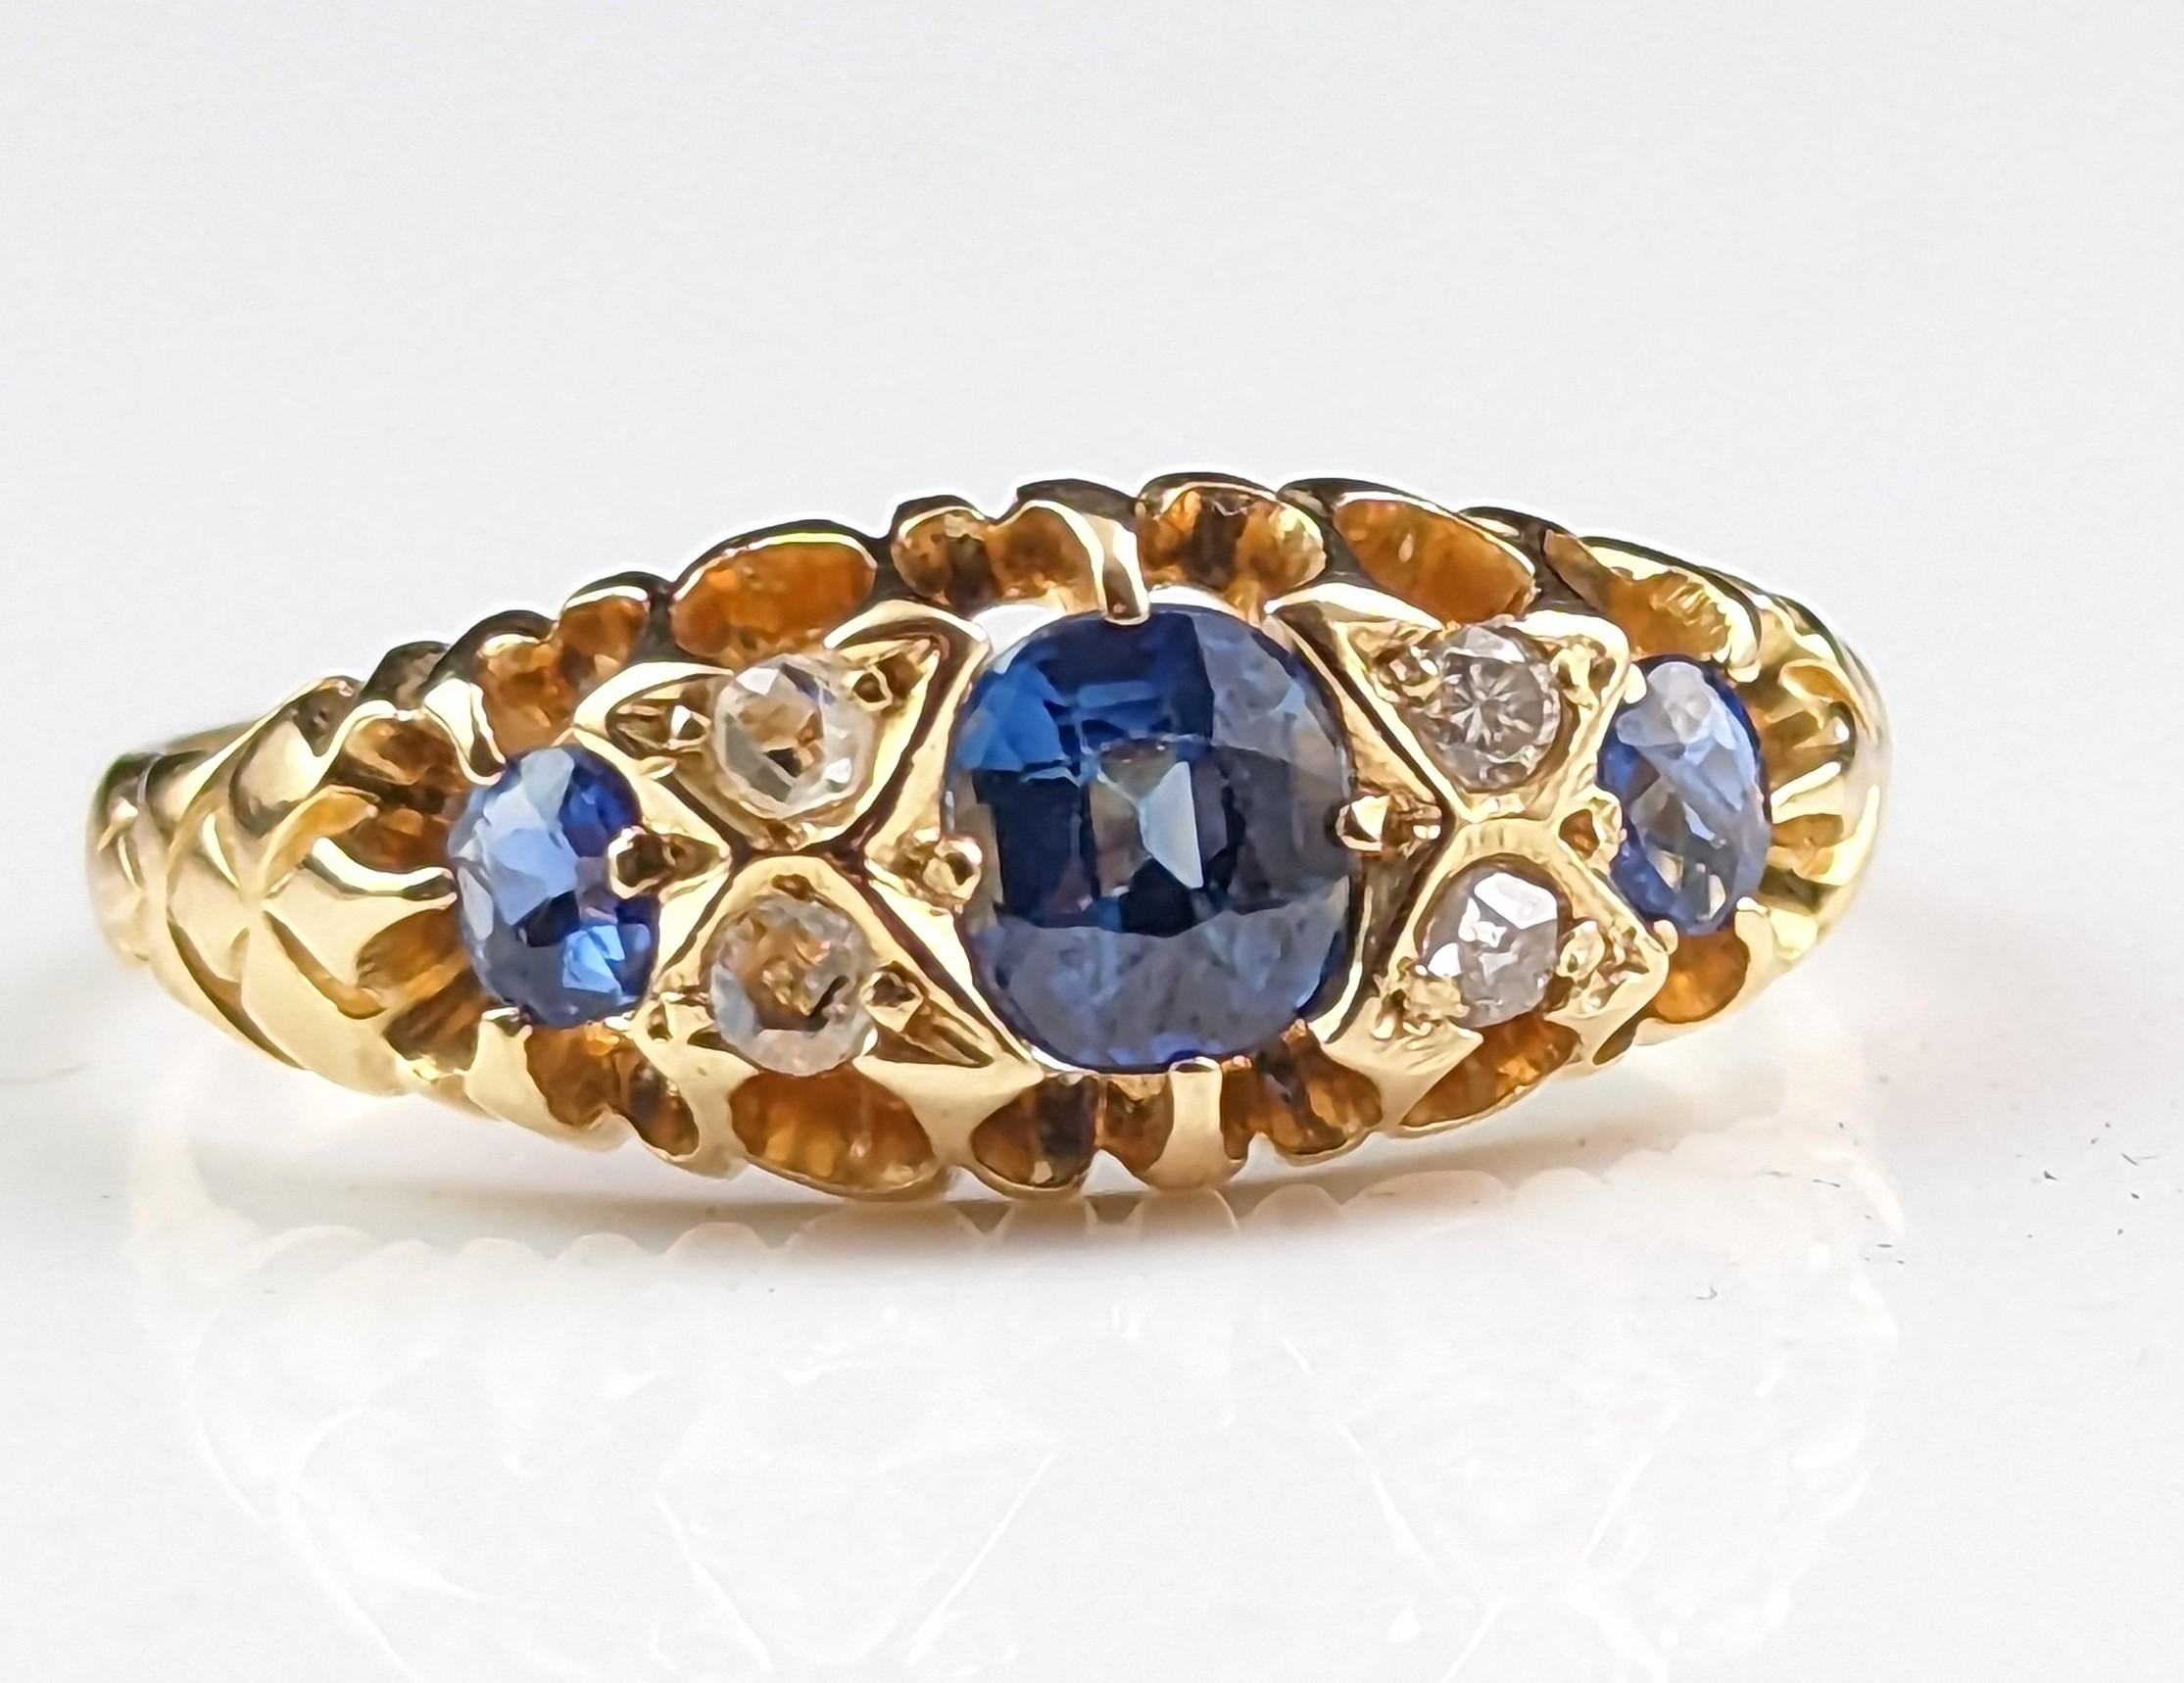 Antique Sapphire and Diamond Ring, 18k Yellow Gold, Victorian 7